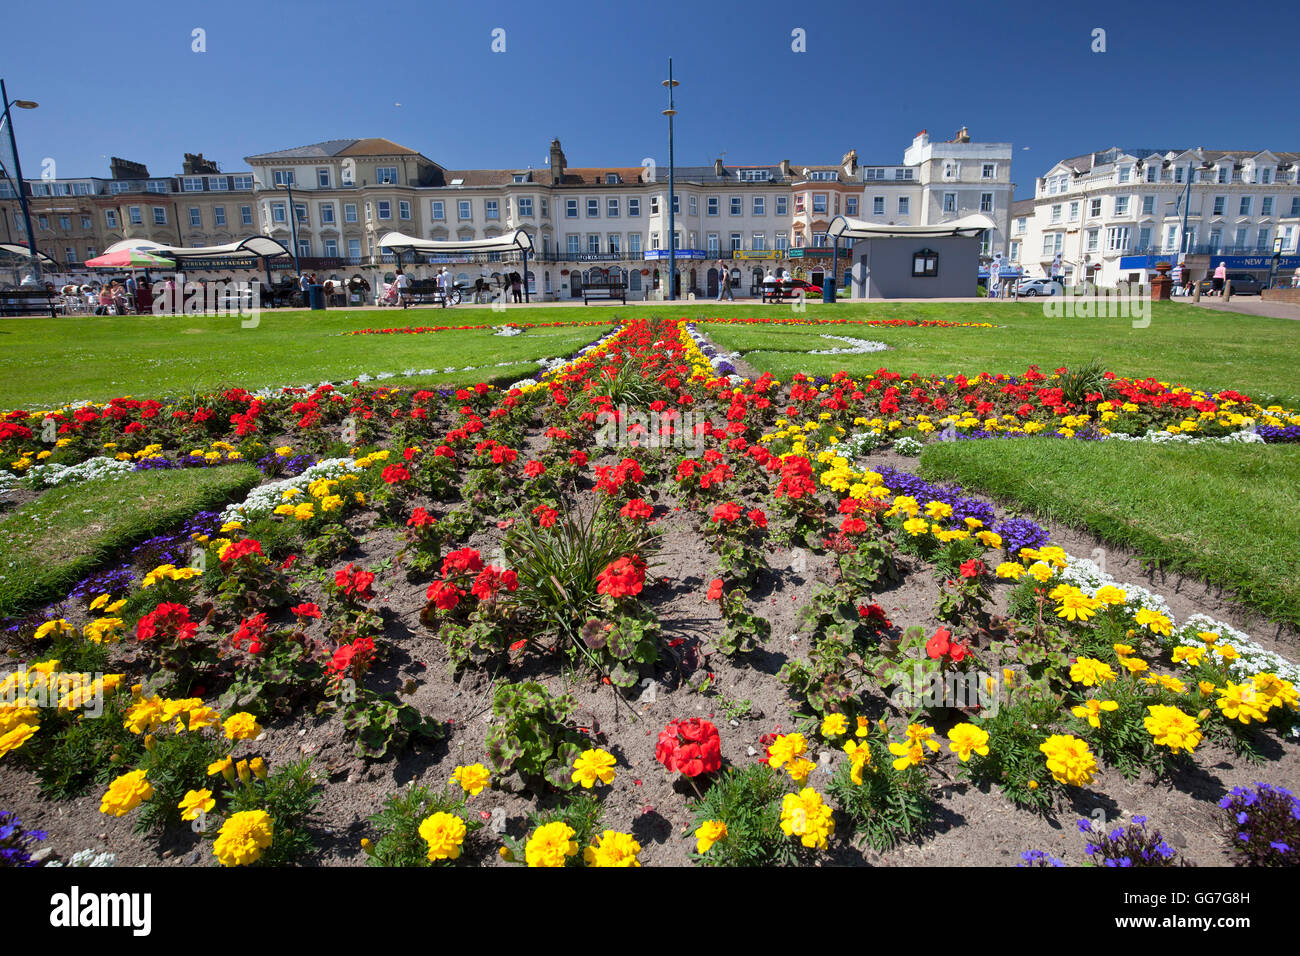 Anchor Gardens on Marine Parade in Great Yarmouth, celebrating the seaside town's maritime heritage. Stock Photo